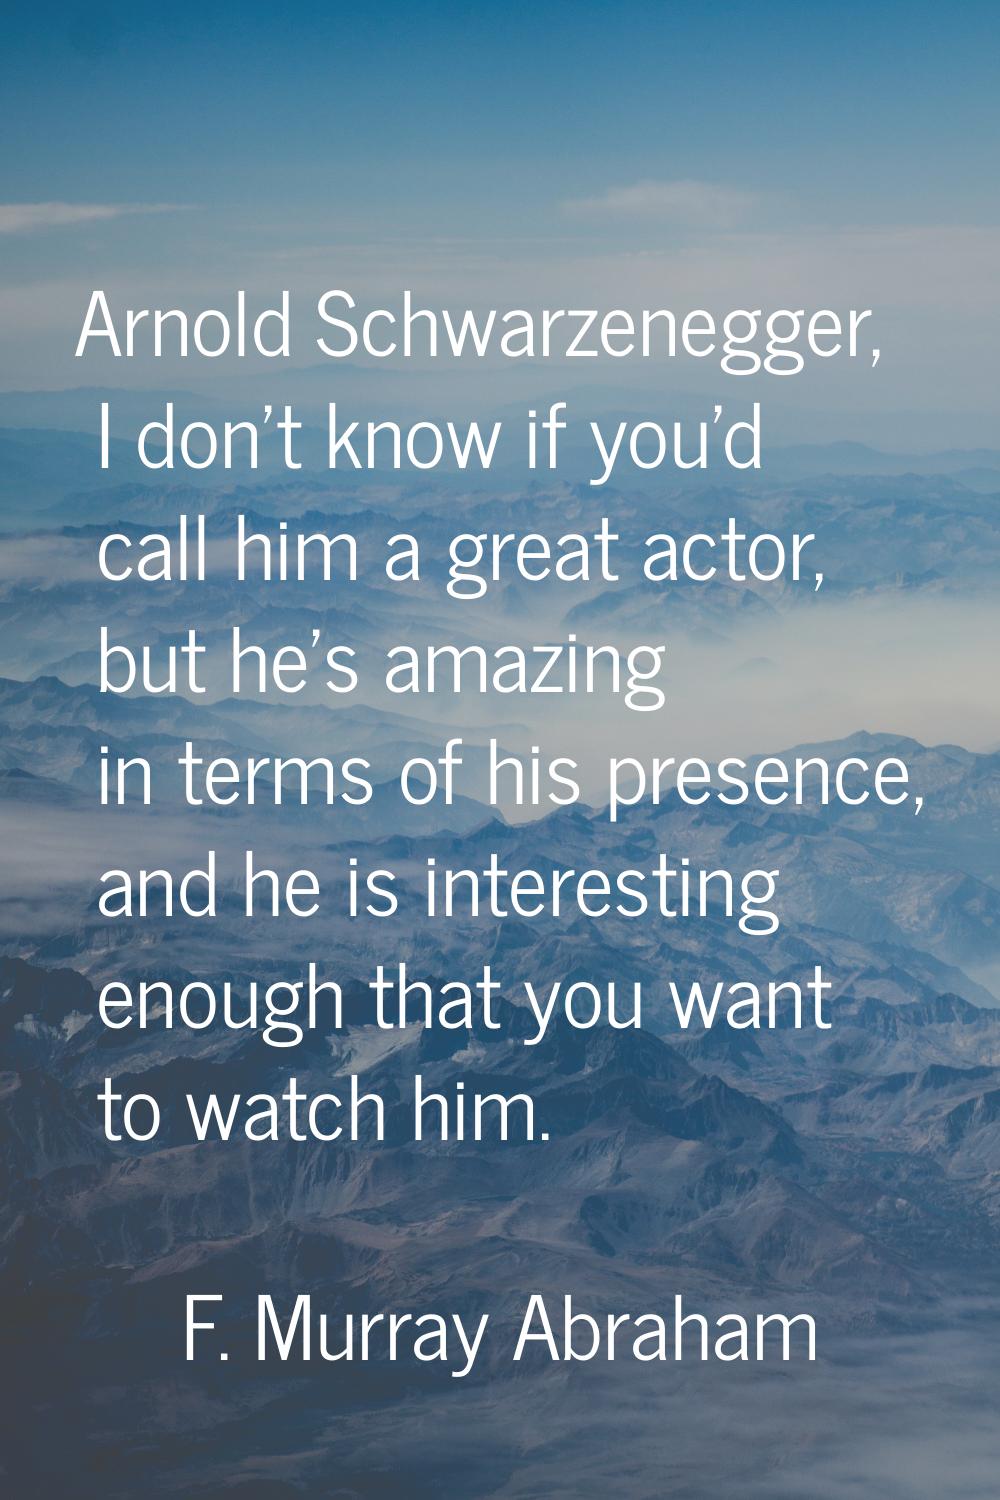 Arnold Schwarzenegger, I don't know if you'd call him a great actor, but he's amazing in terms of h